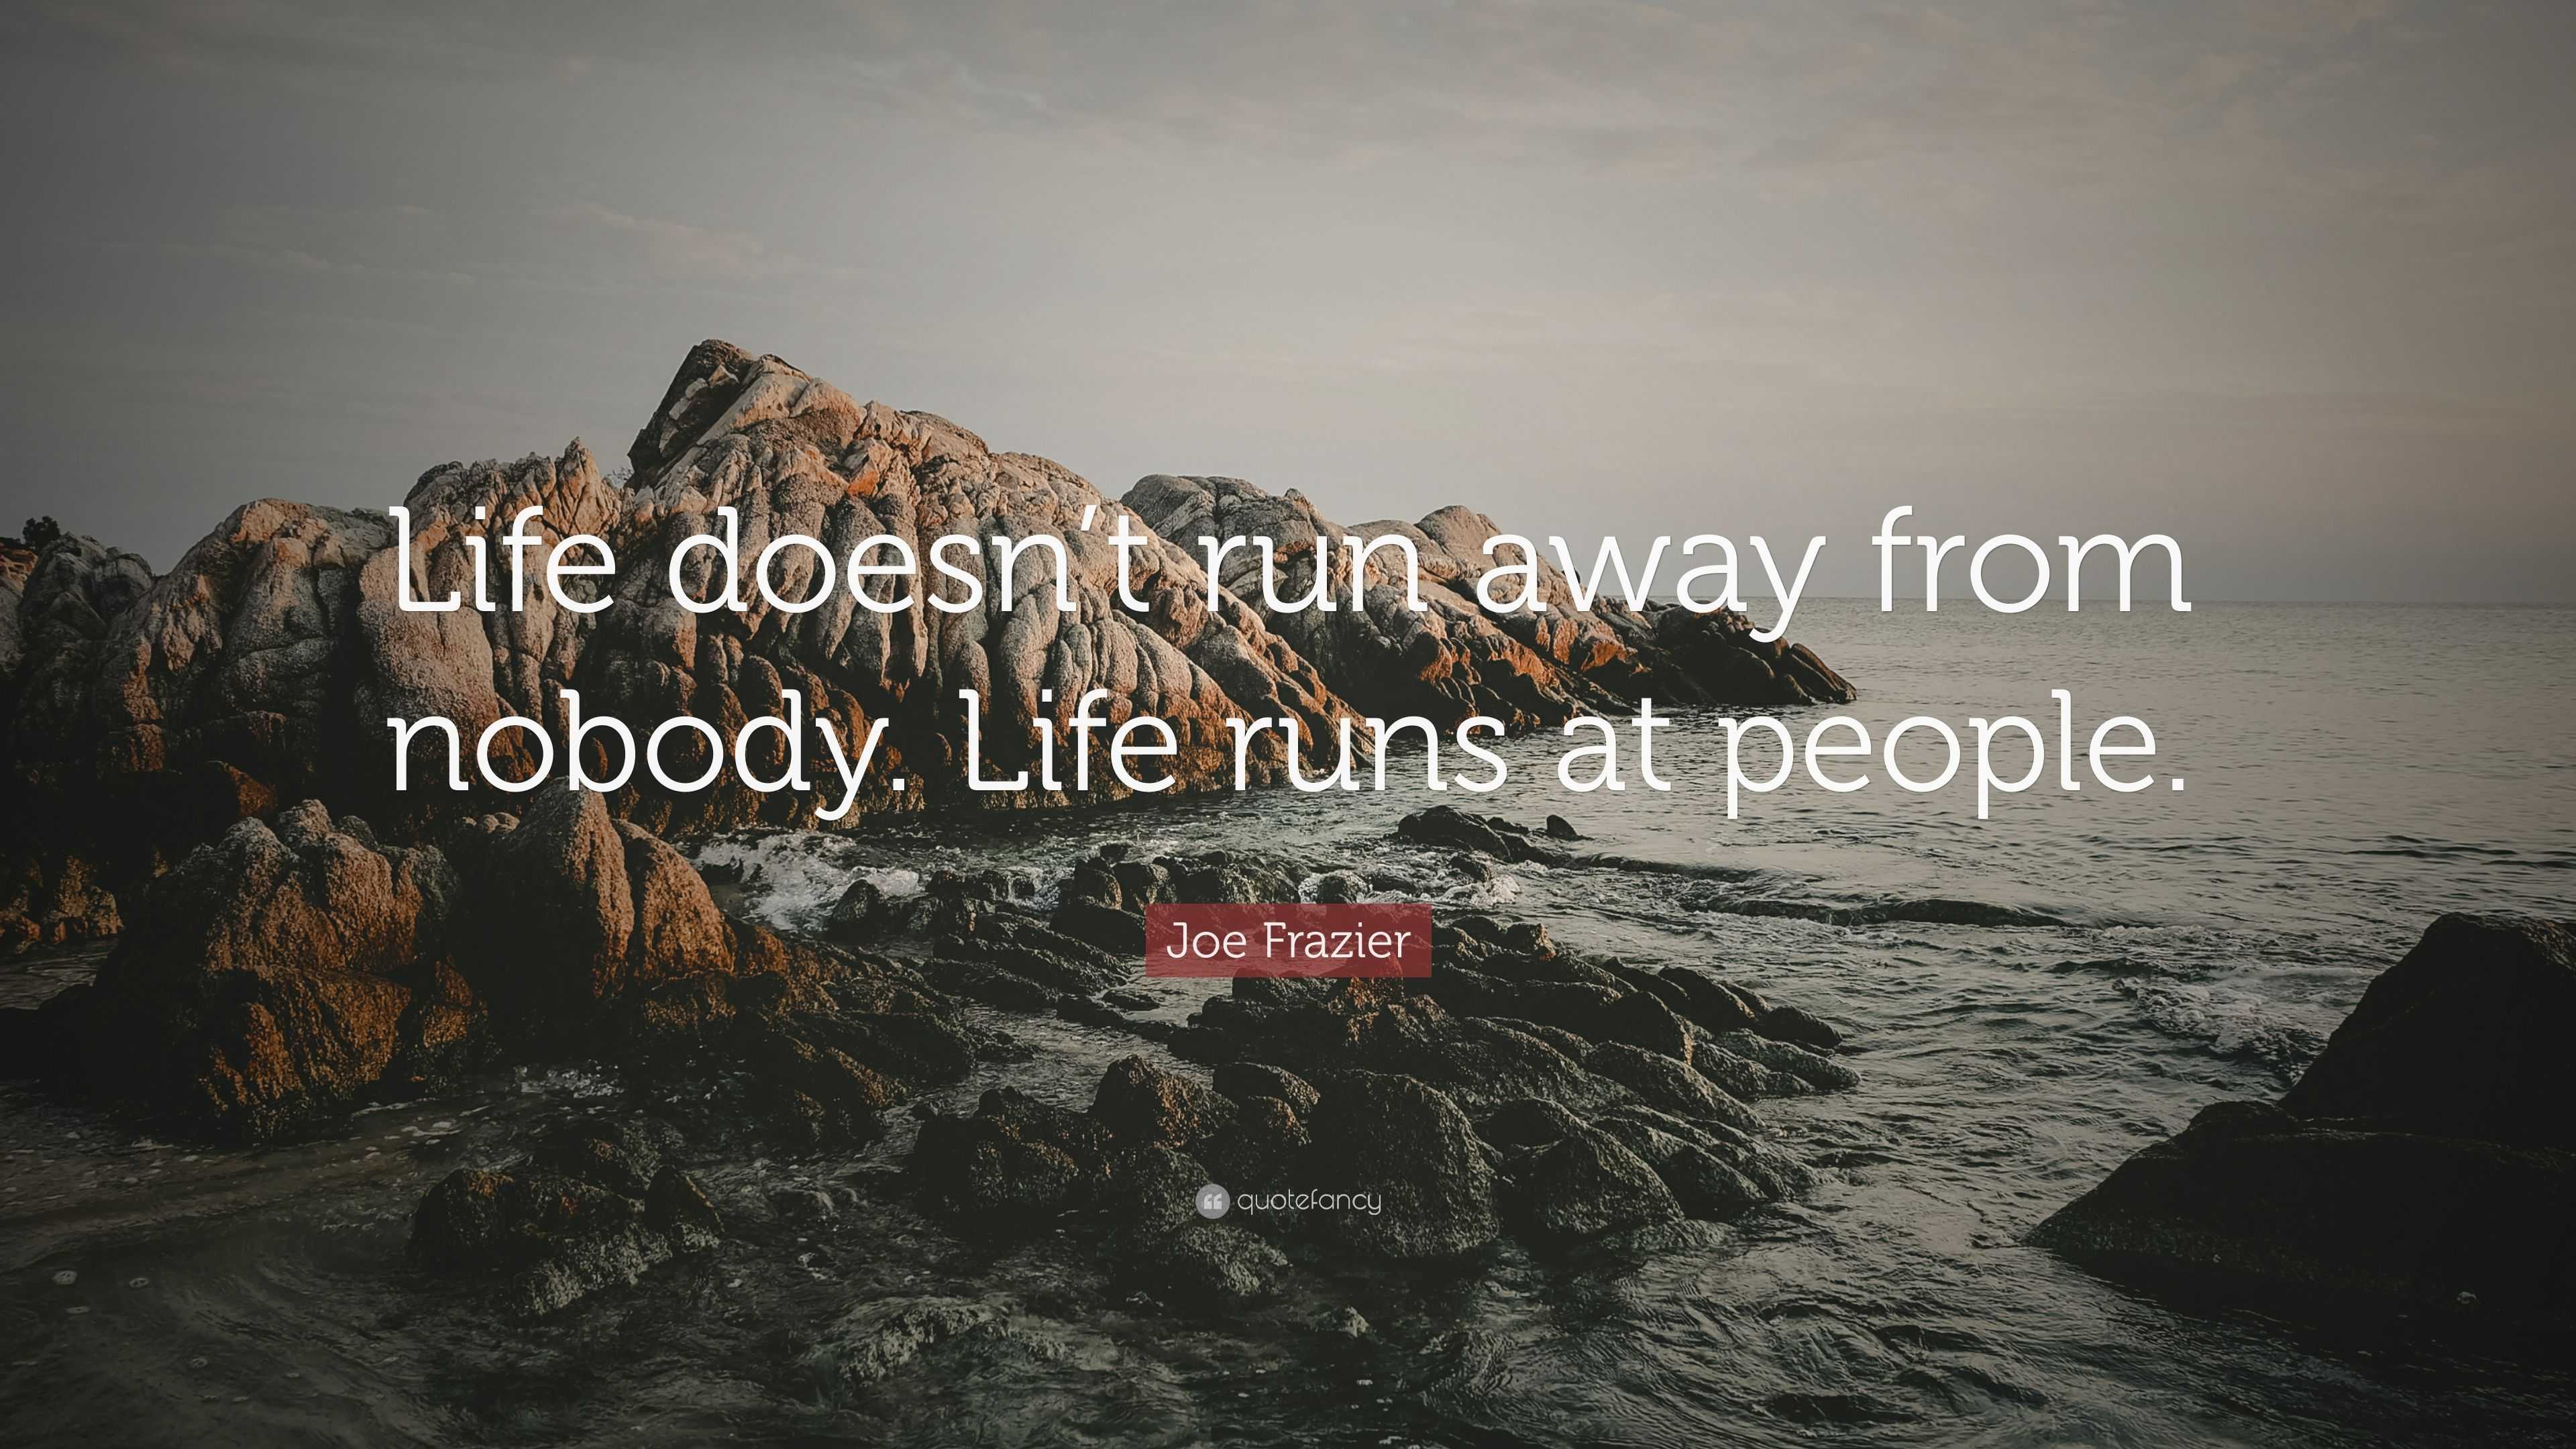 Joe Frazier Quote: “Life doesn’t run away from nobody. Life runs at ...